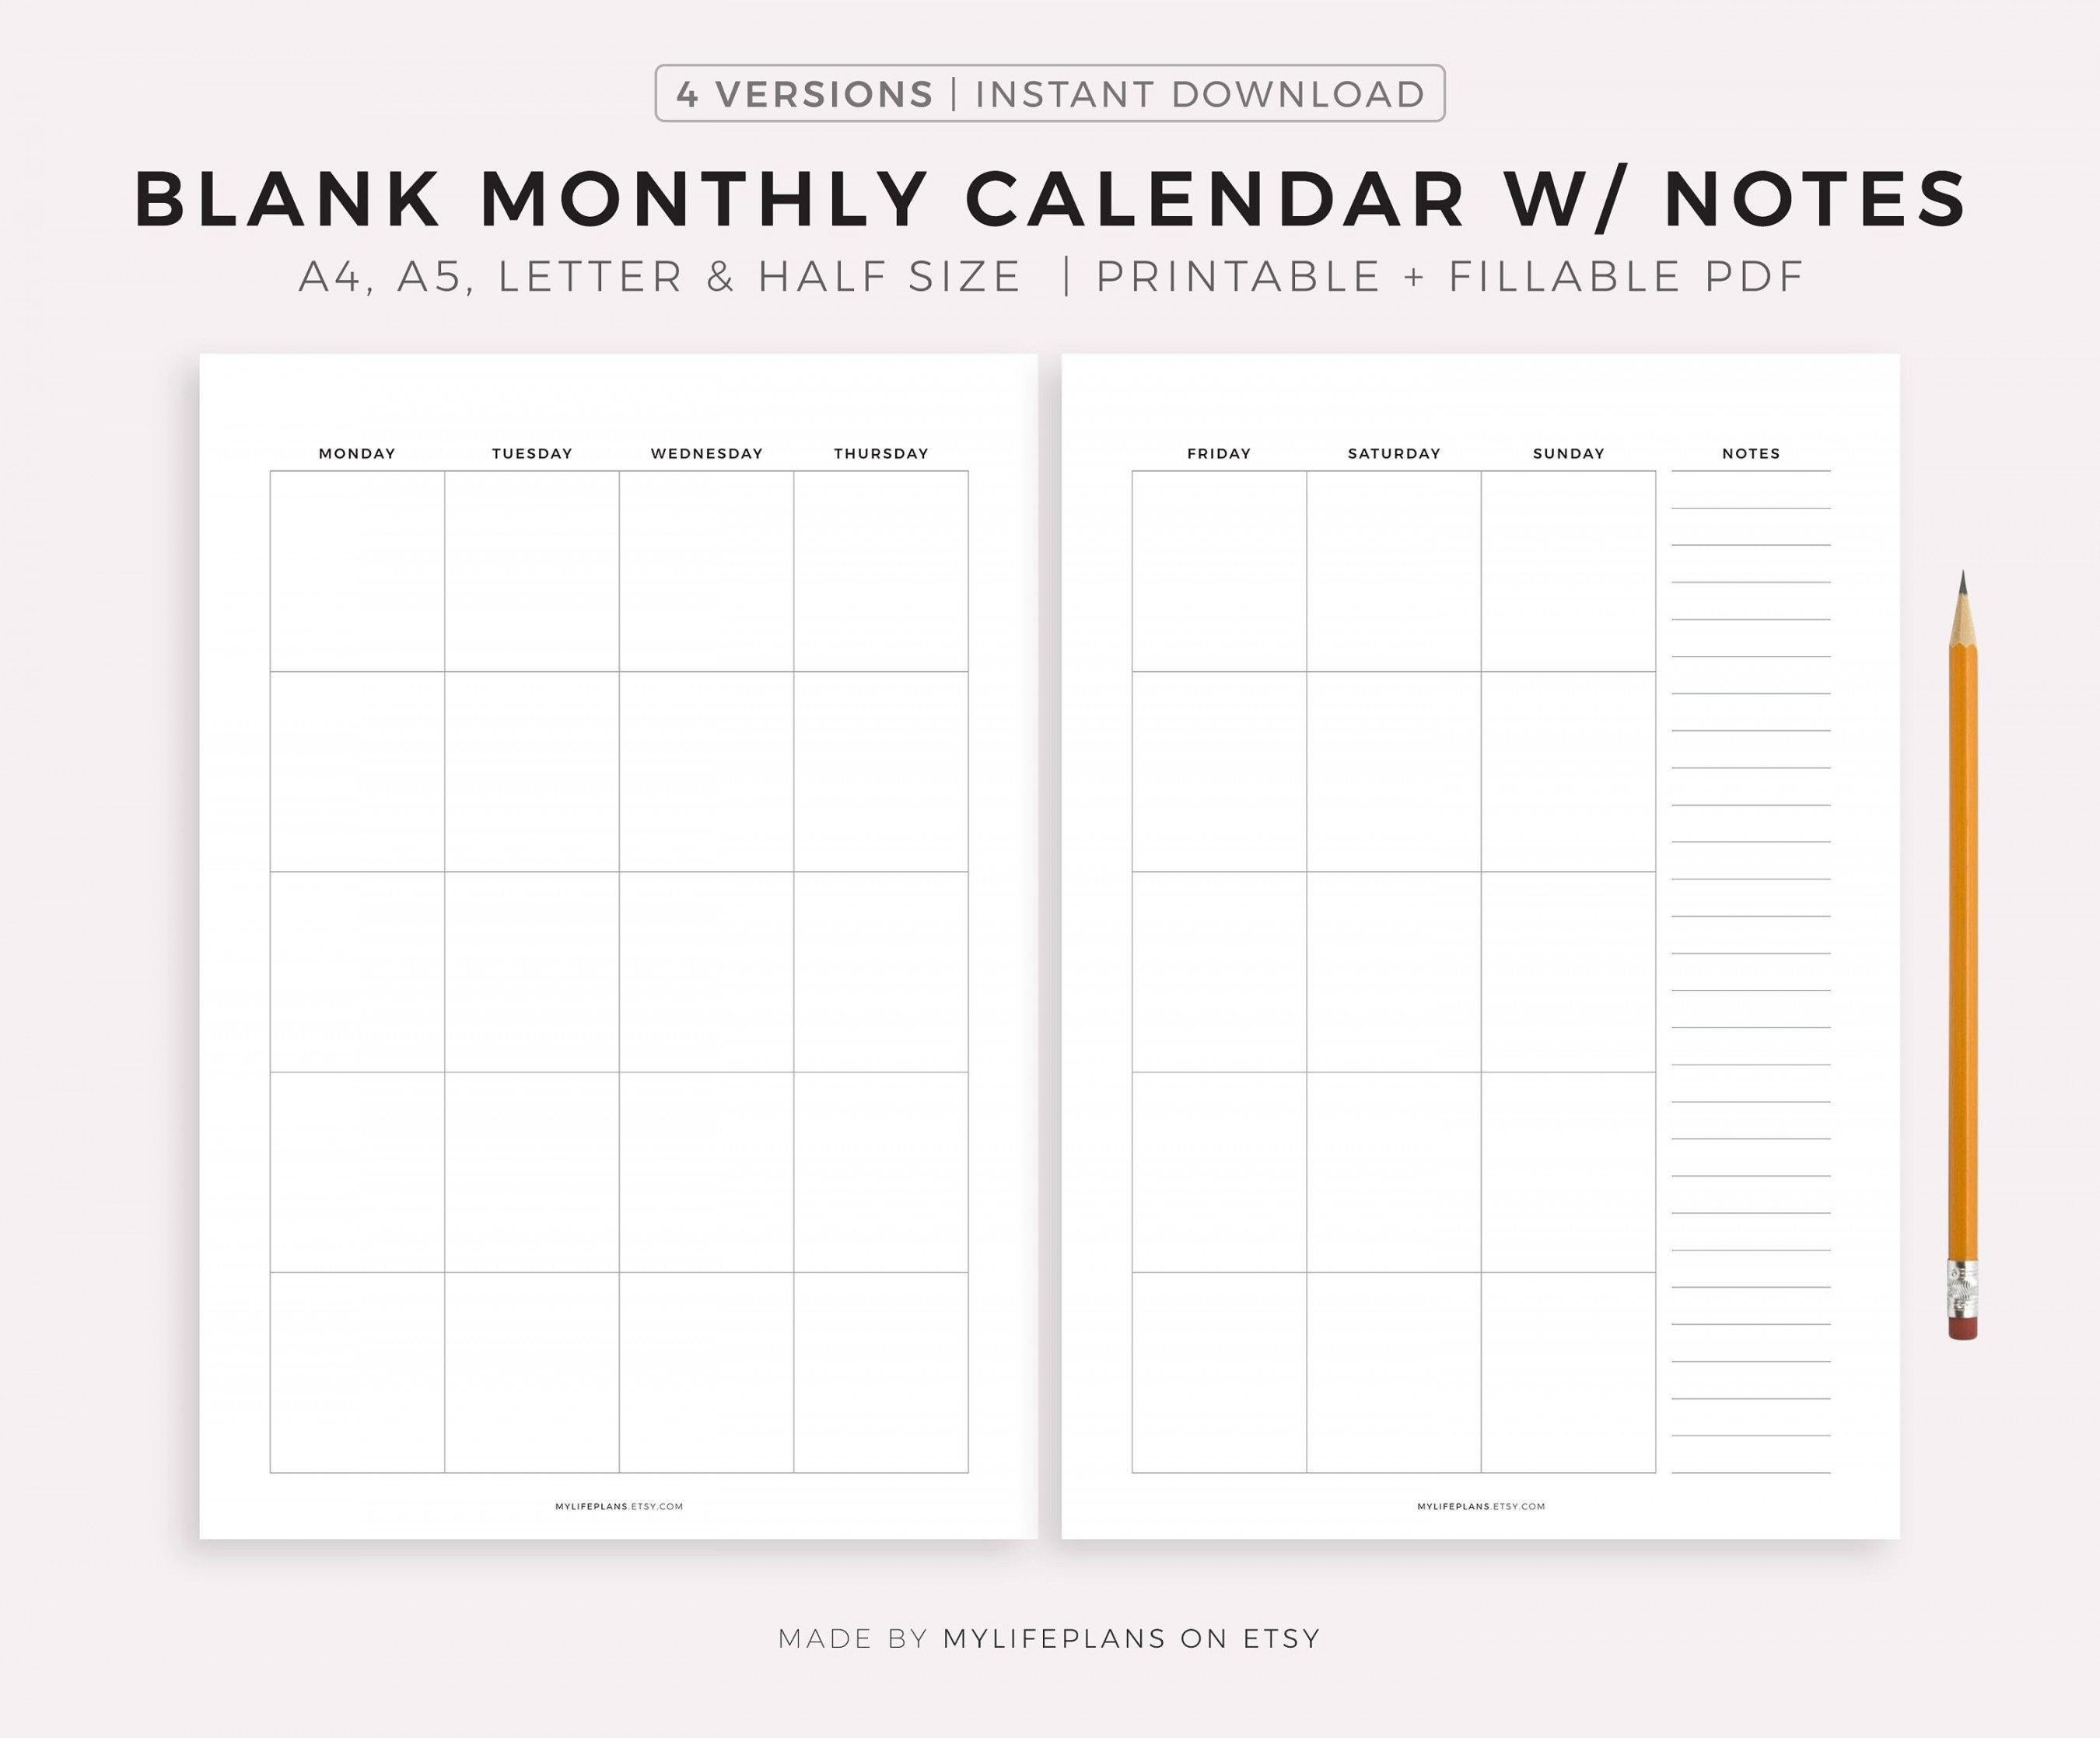 Blank Monthly Calendar With Notes  Page Printable Calendar - Etsy